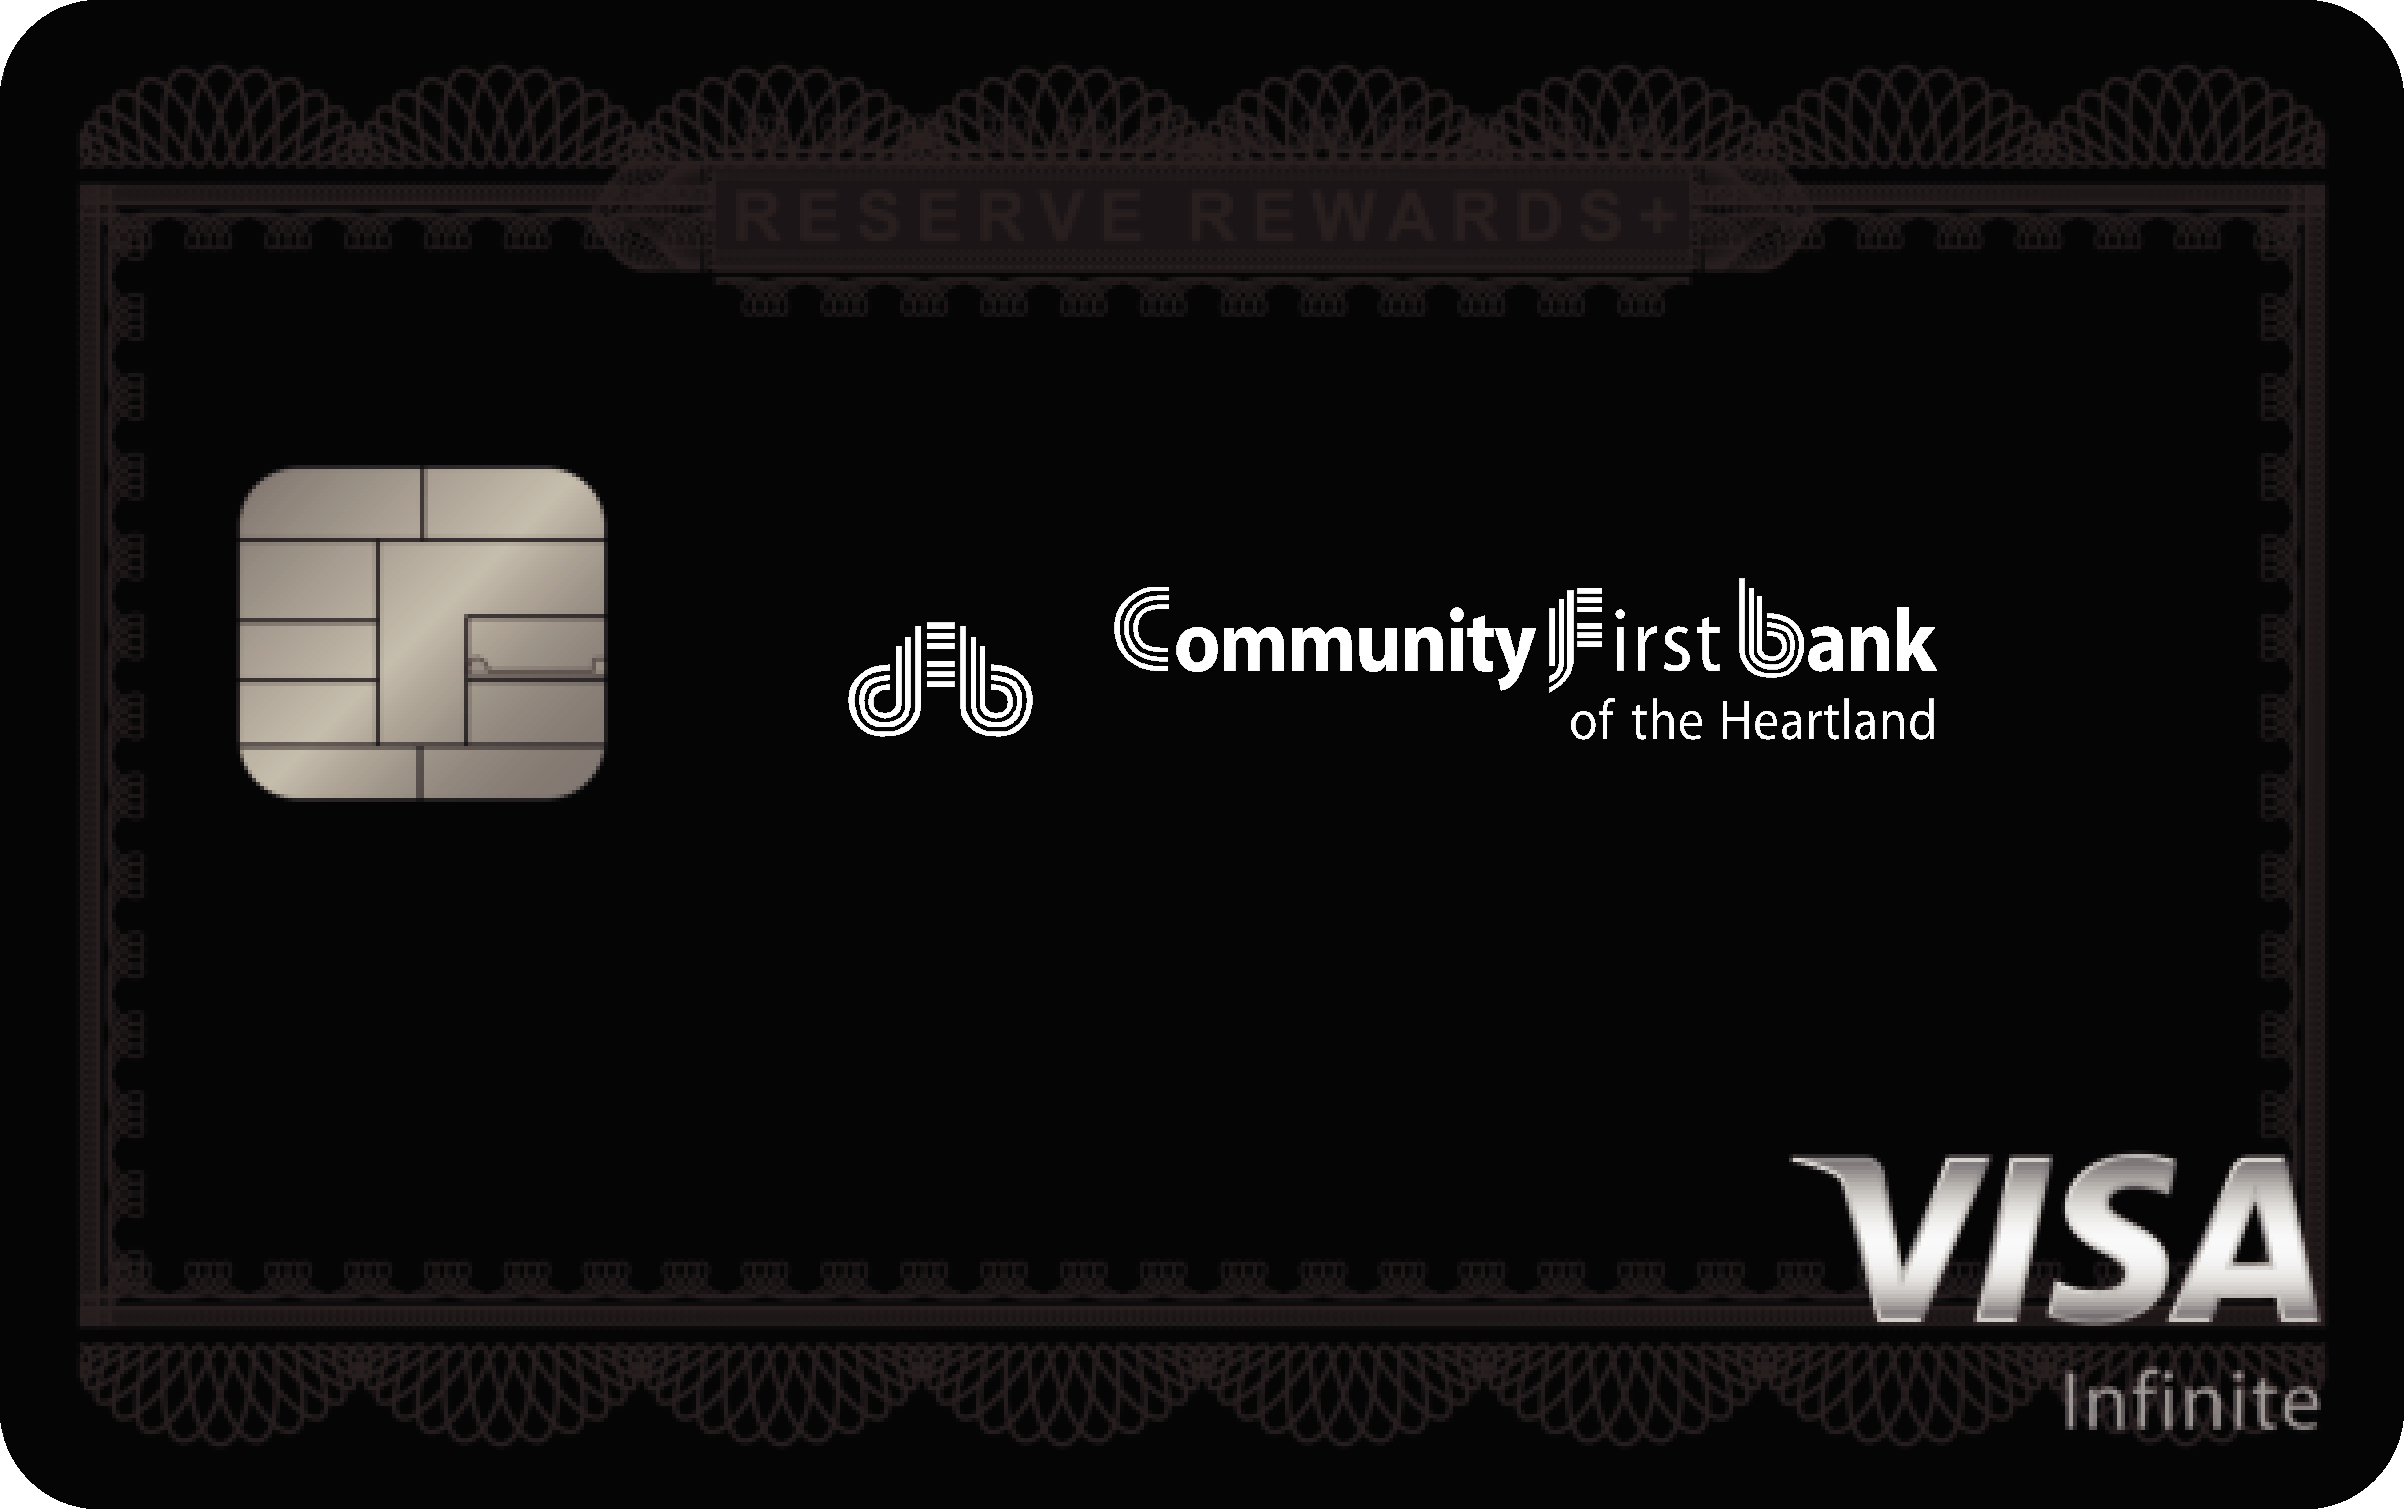 Community First Bank of the Heartland